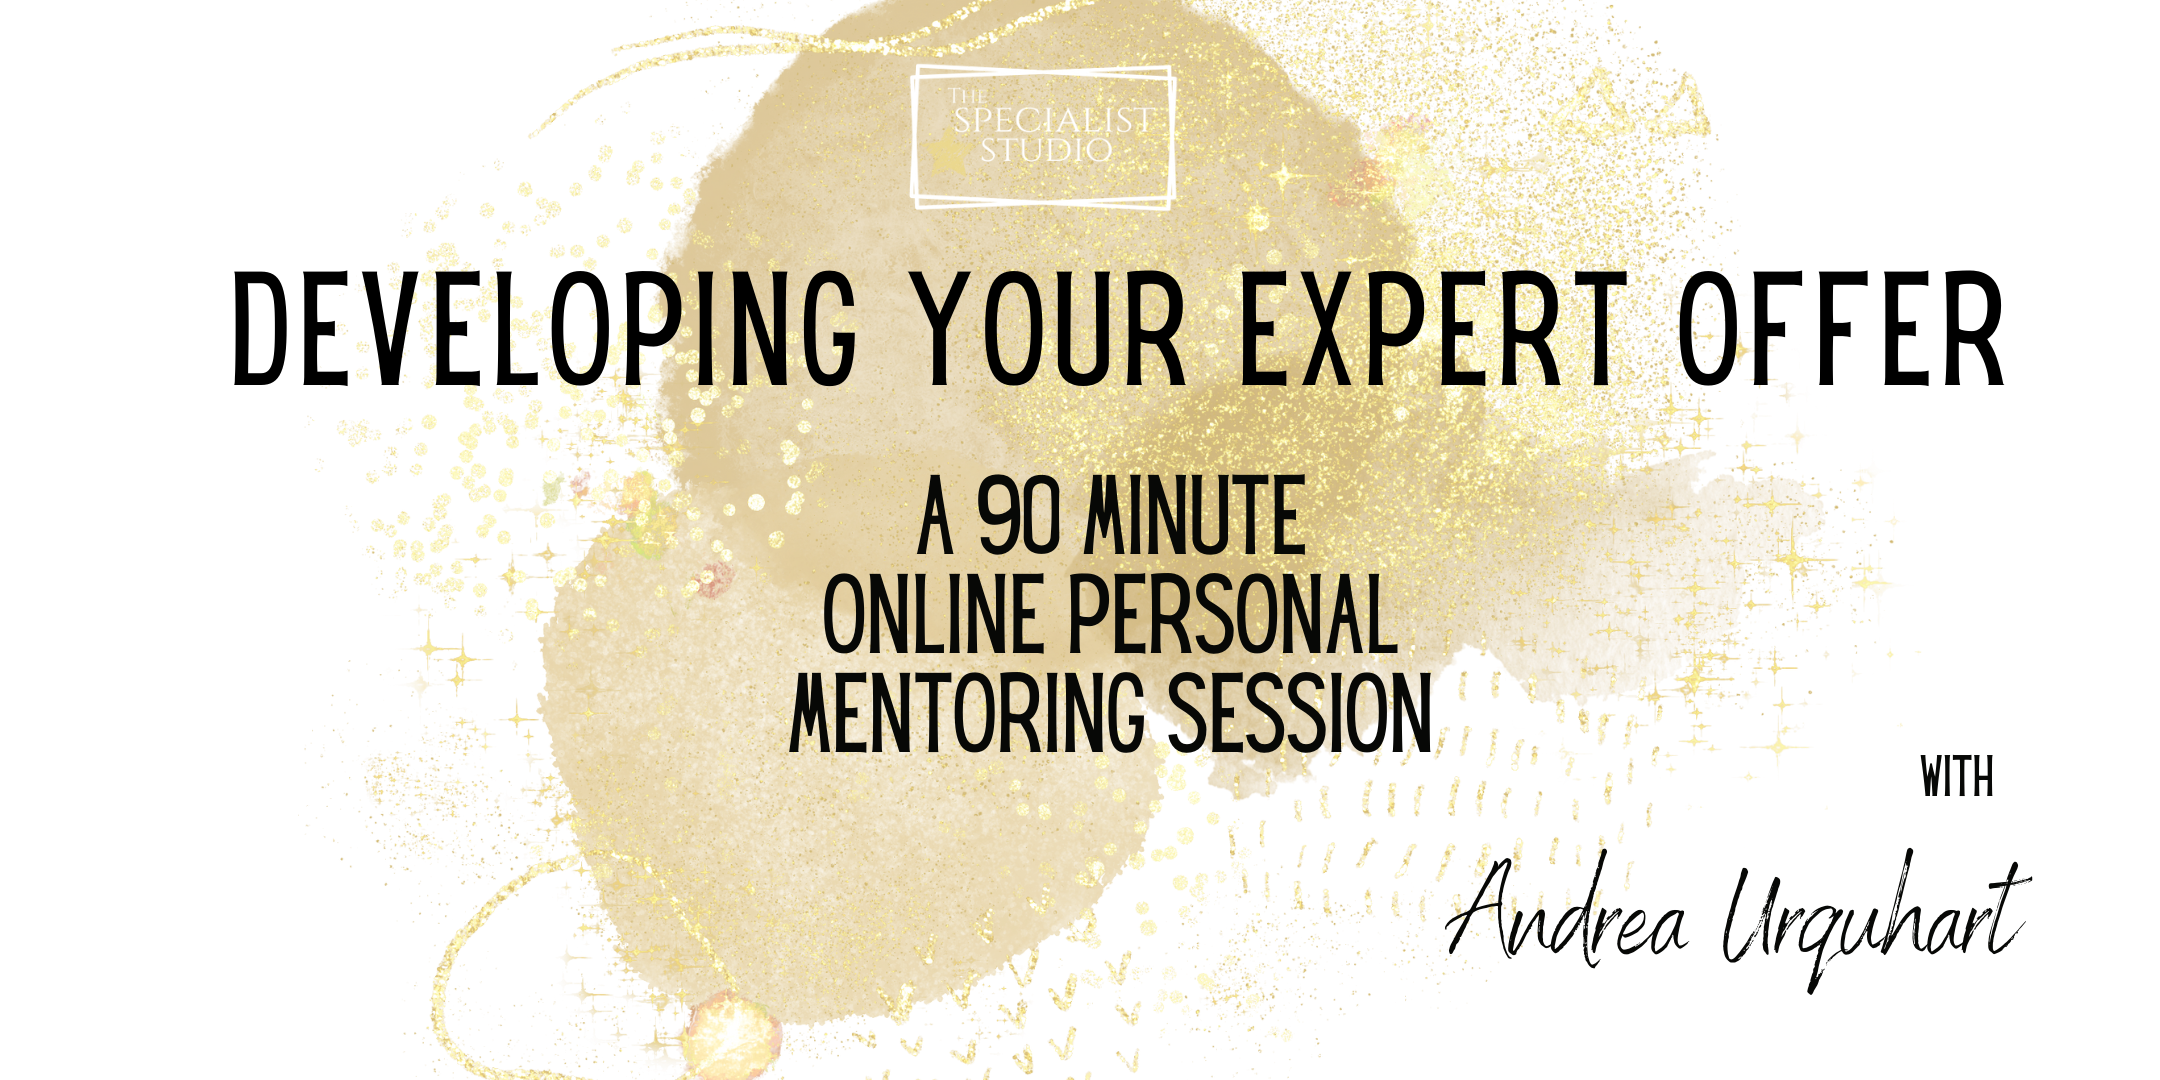 An image advertising a mentoring session for coaches and therapists called developing your expert offer